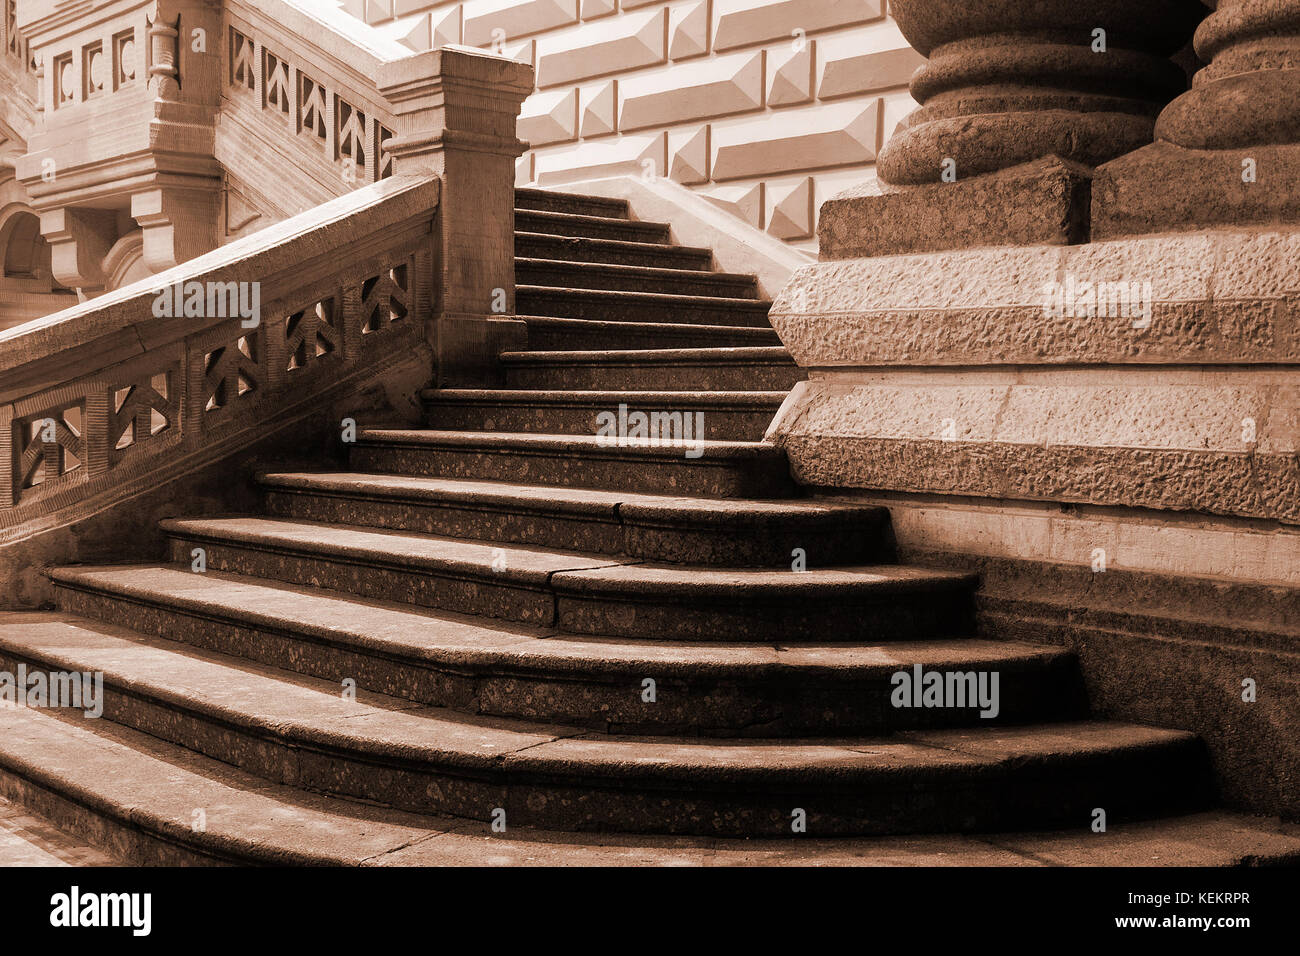 Entrance in an old architecture historic public buildind with granite staircase and columns. Stock Photo